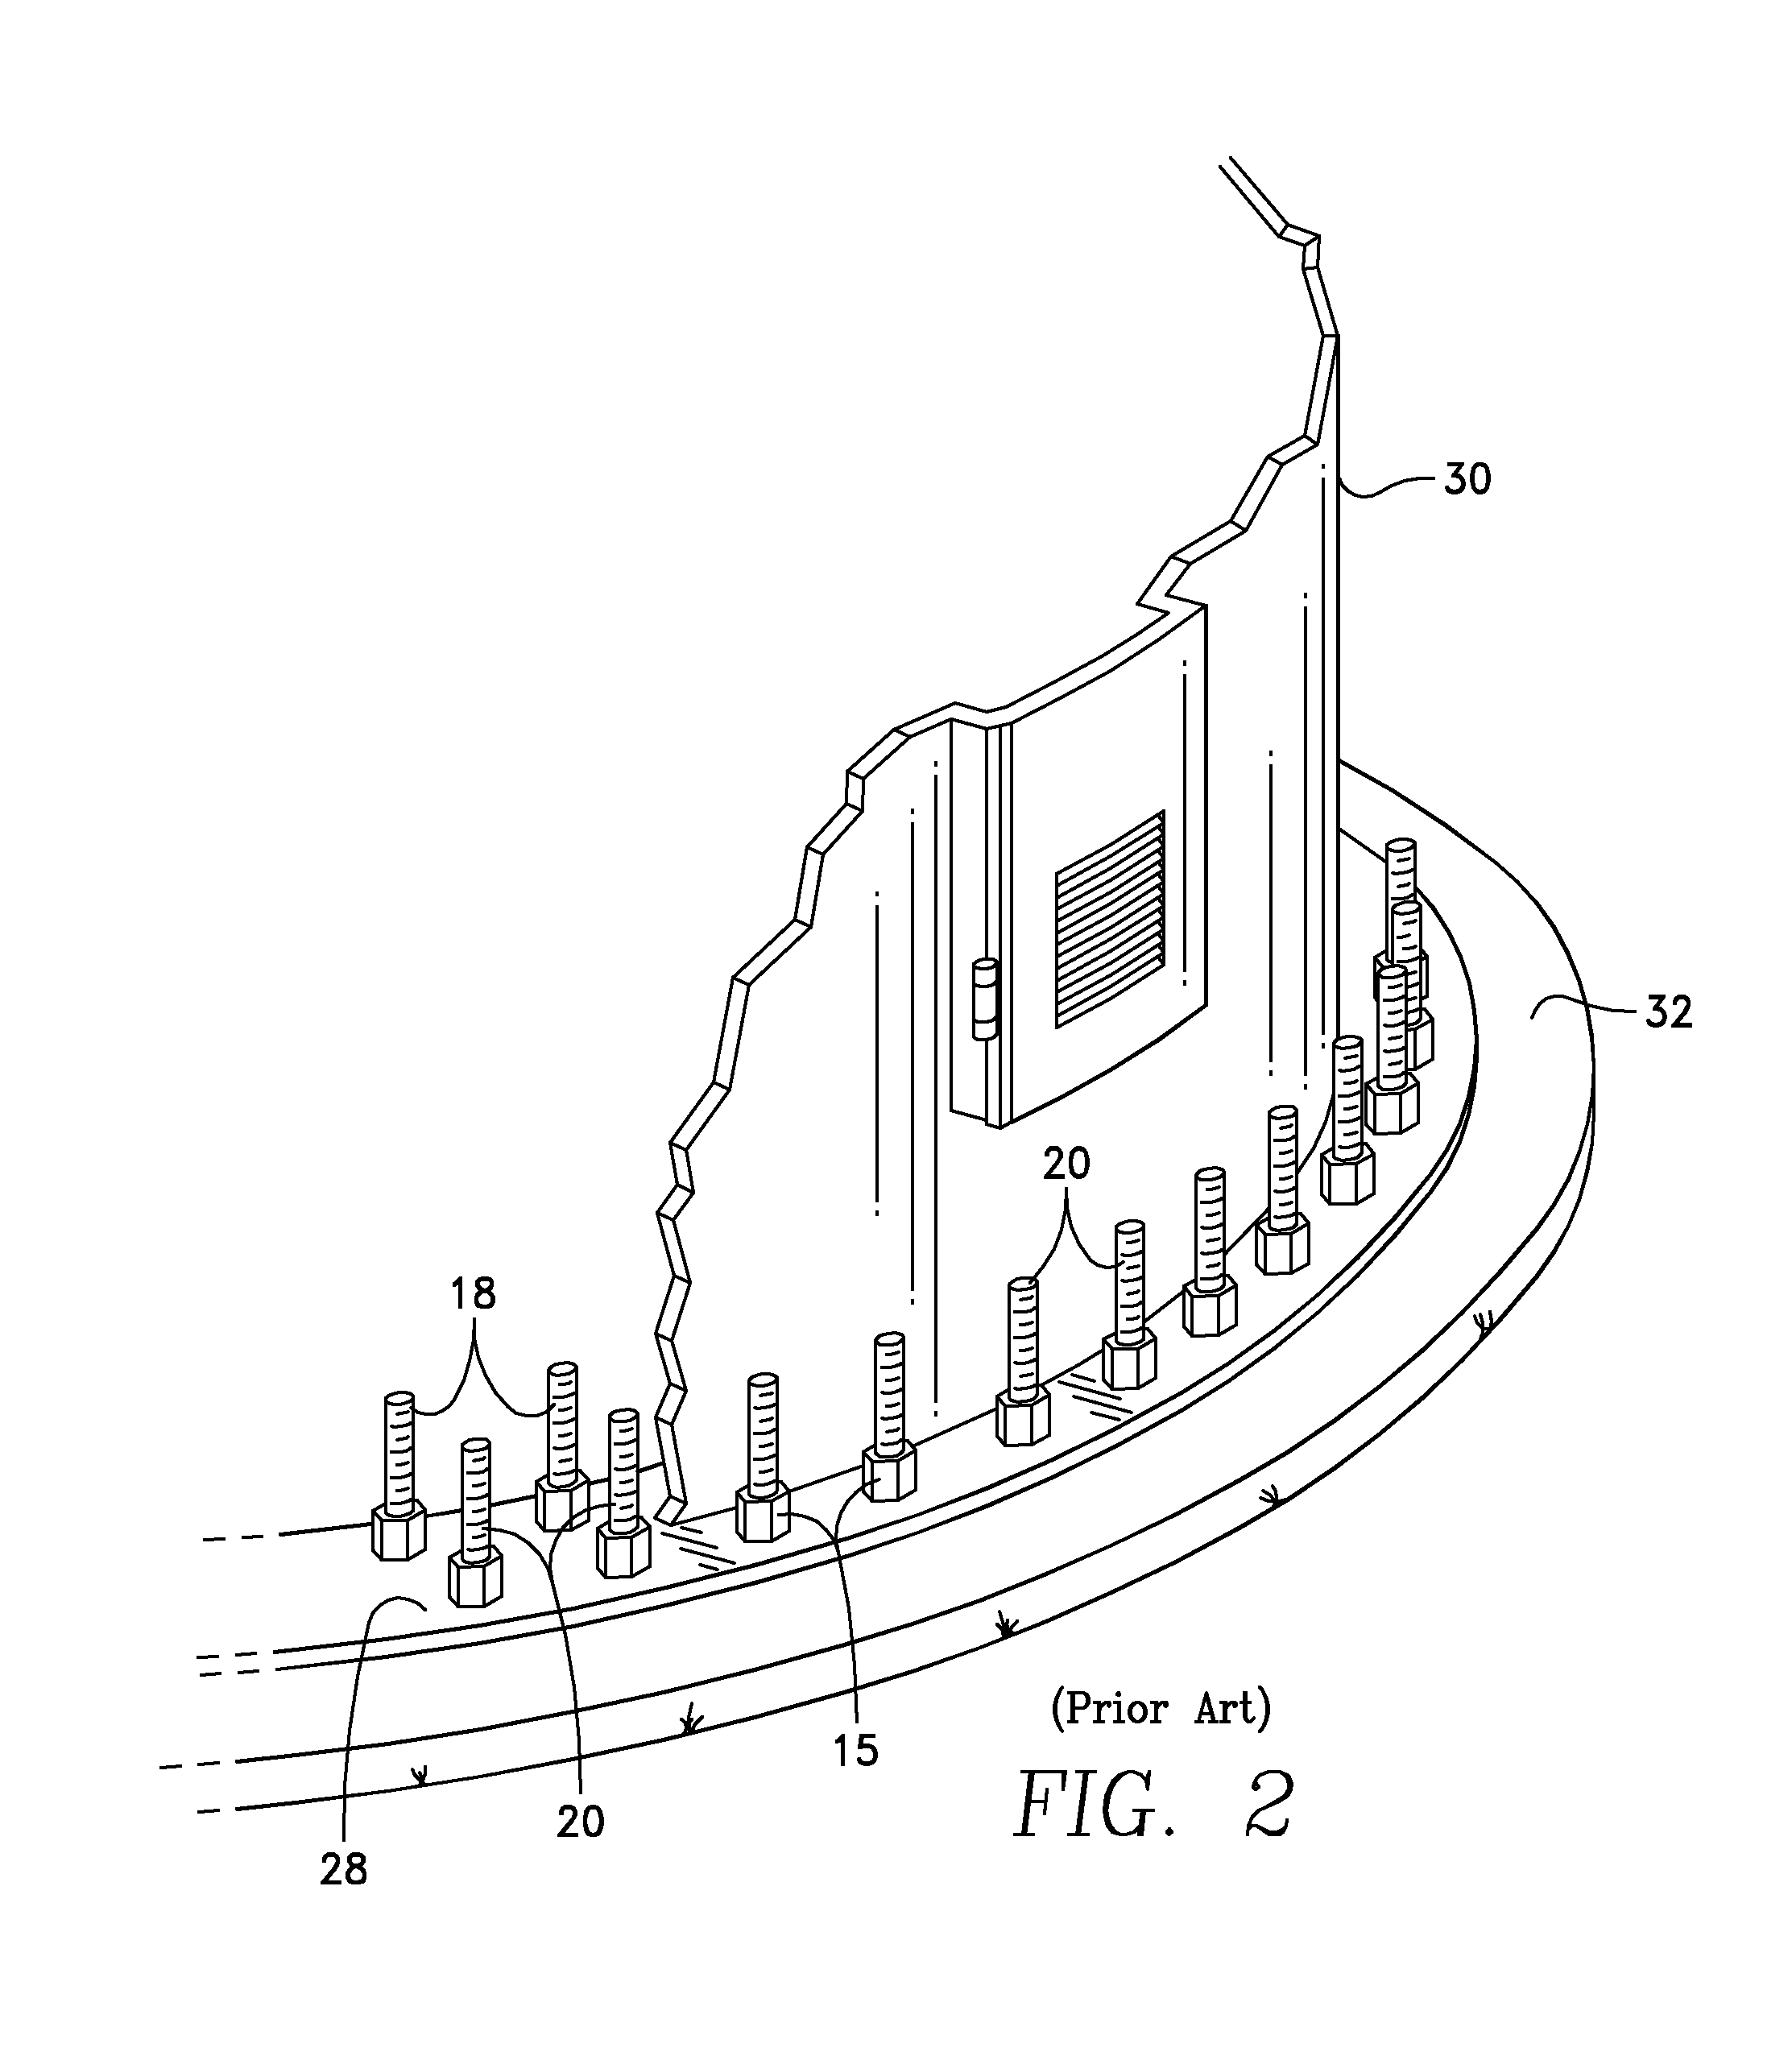 Grout Template and Method of Use for Wind Turbine Foundations